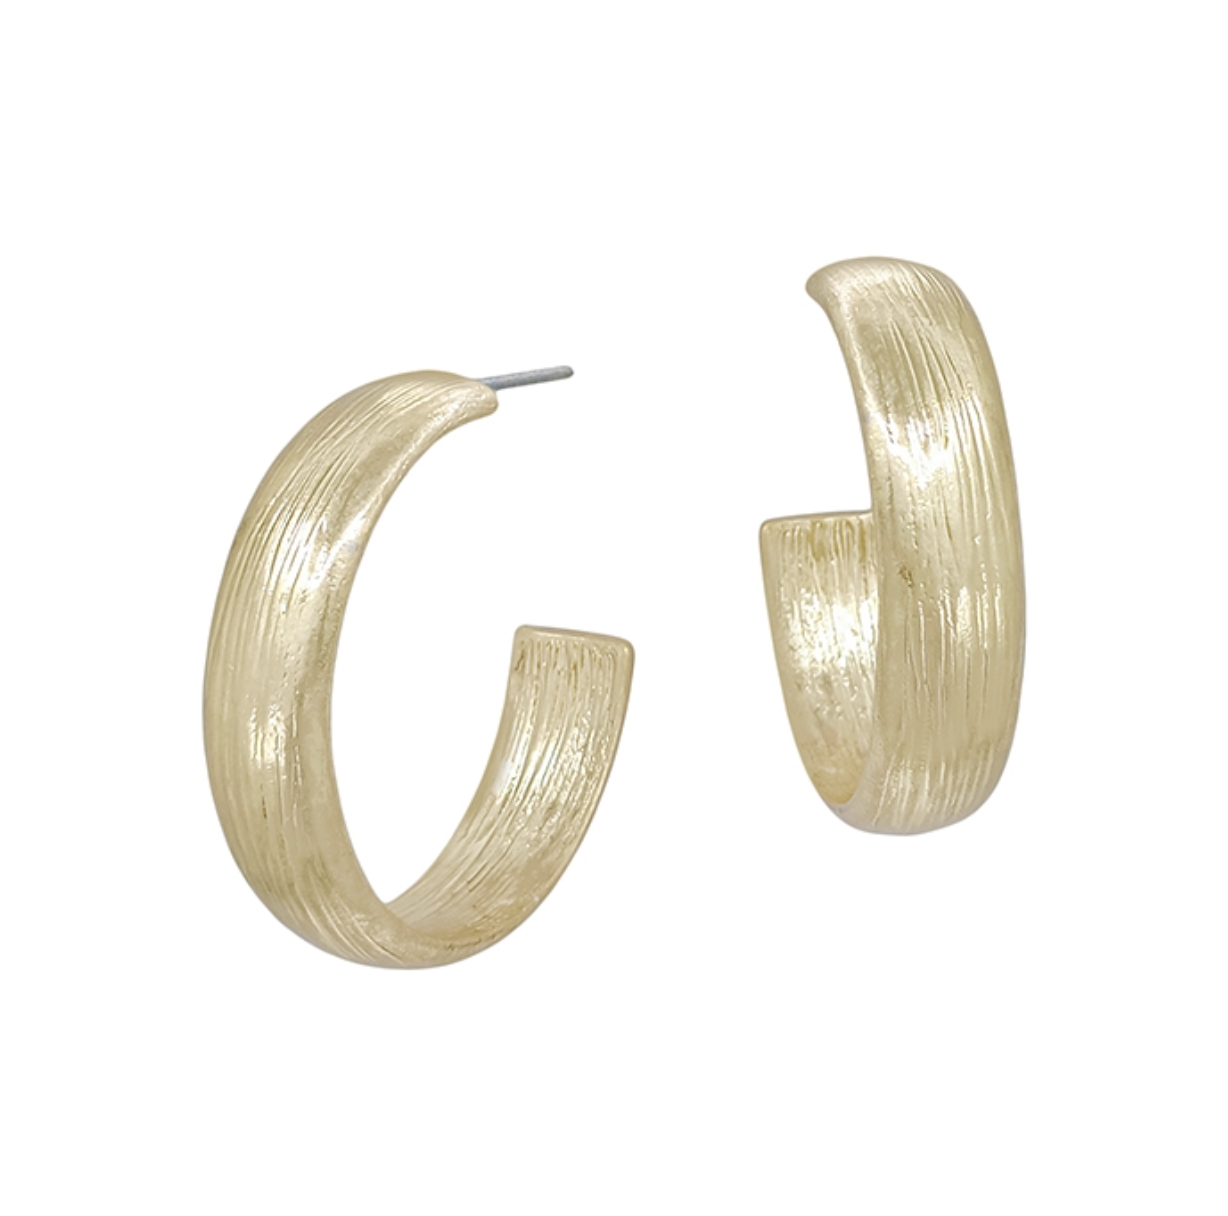 Textured Worn Earrings (Gold or Silver)